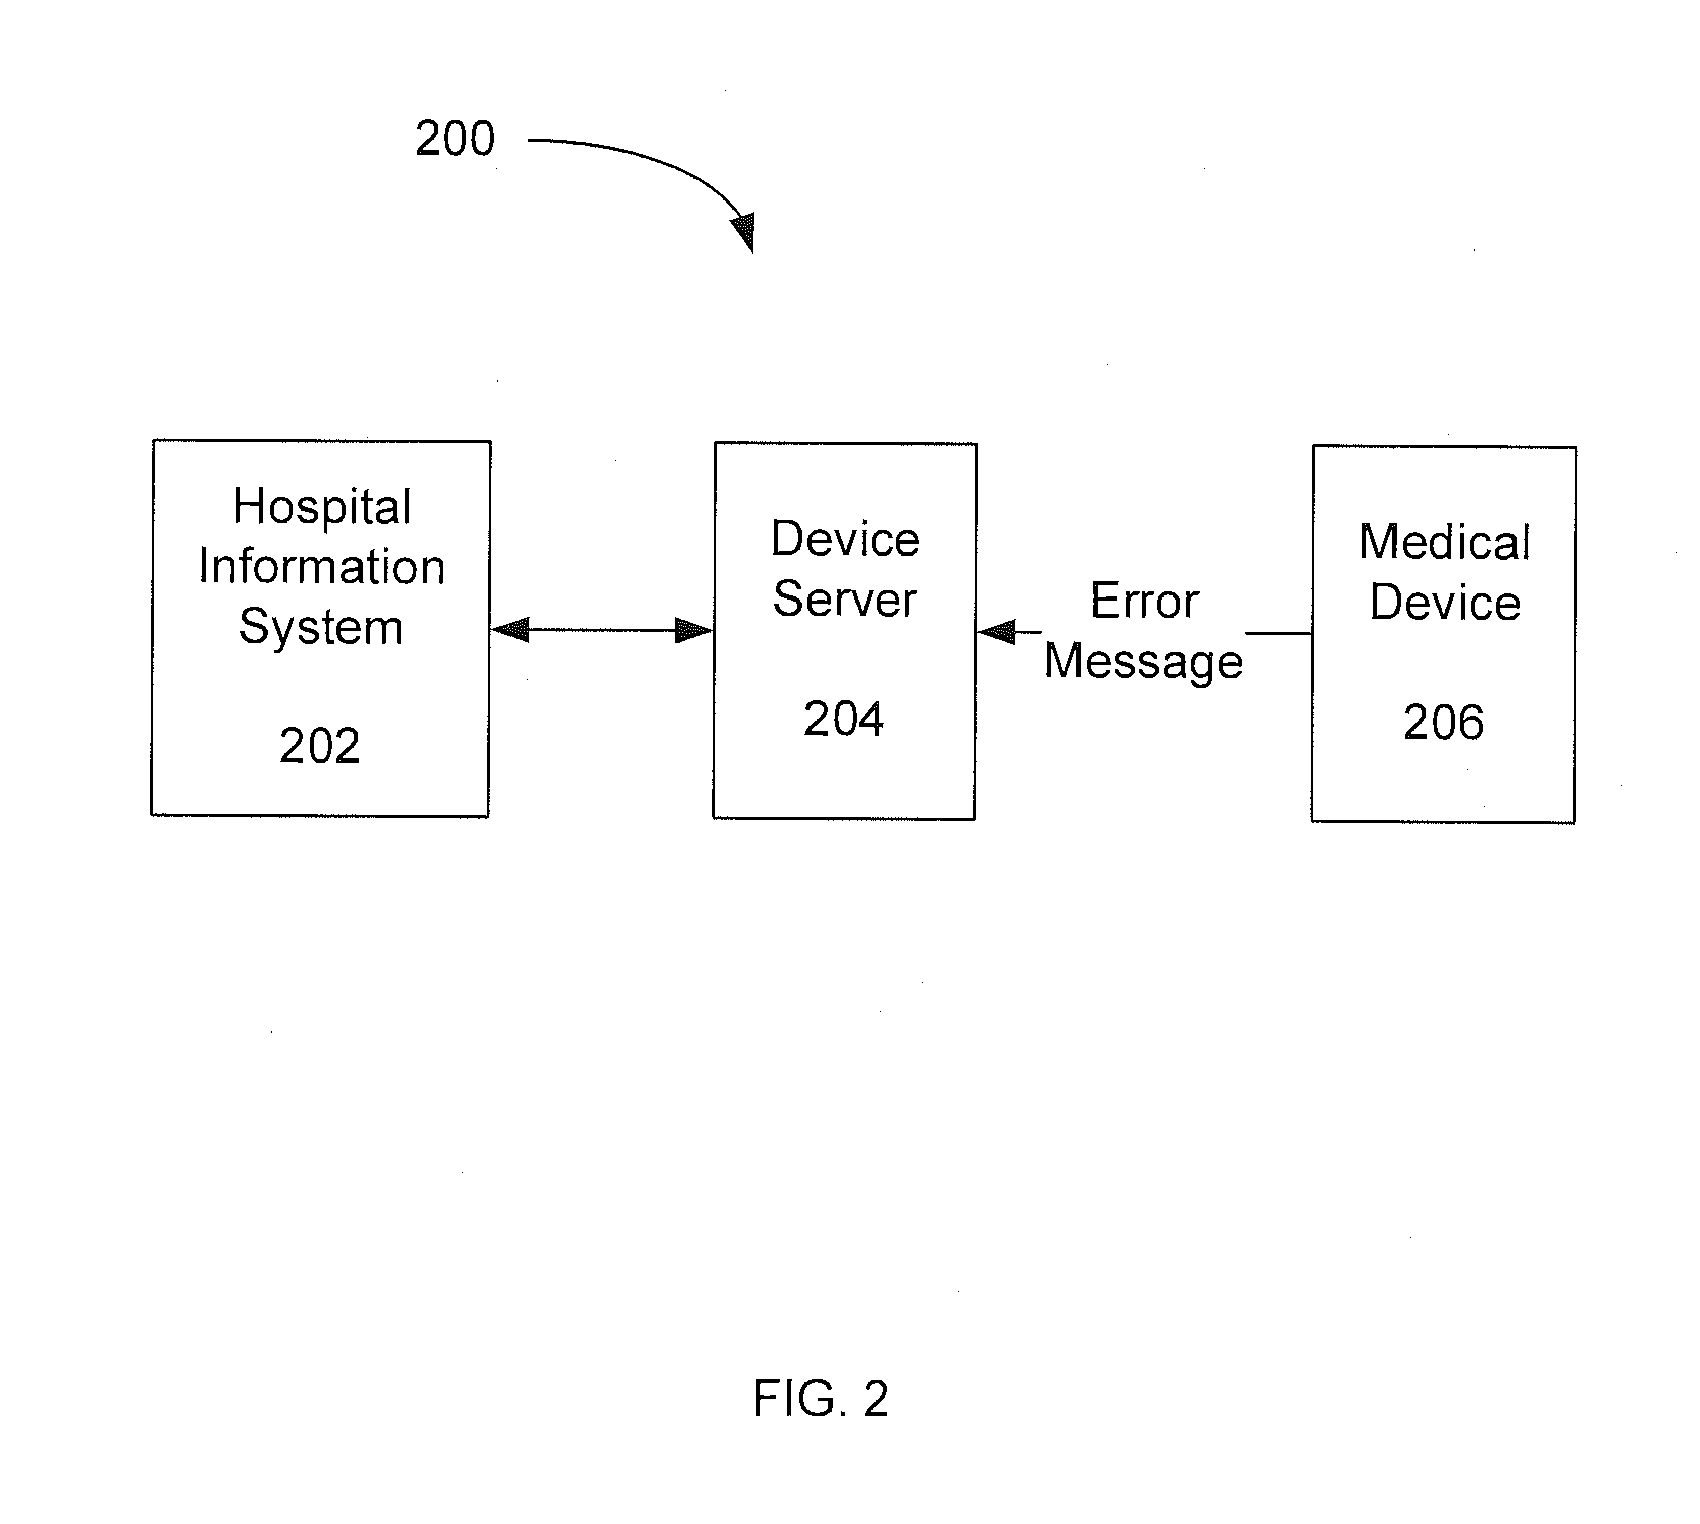 Medical Device Connectivity to Hospital Information Systems Using Device Server